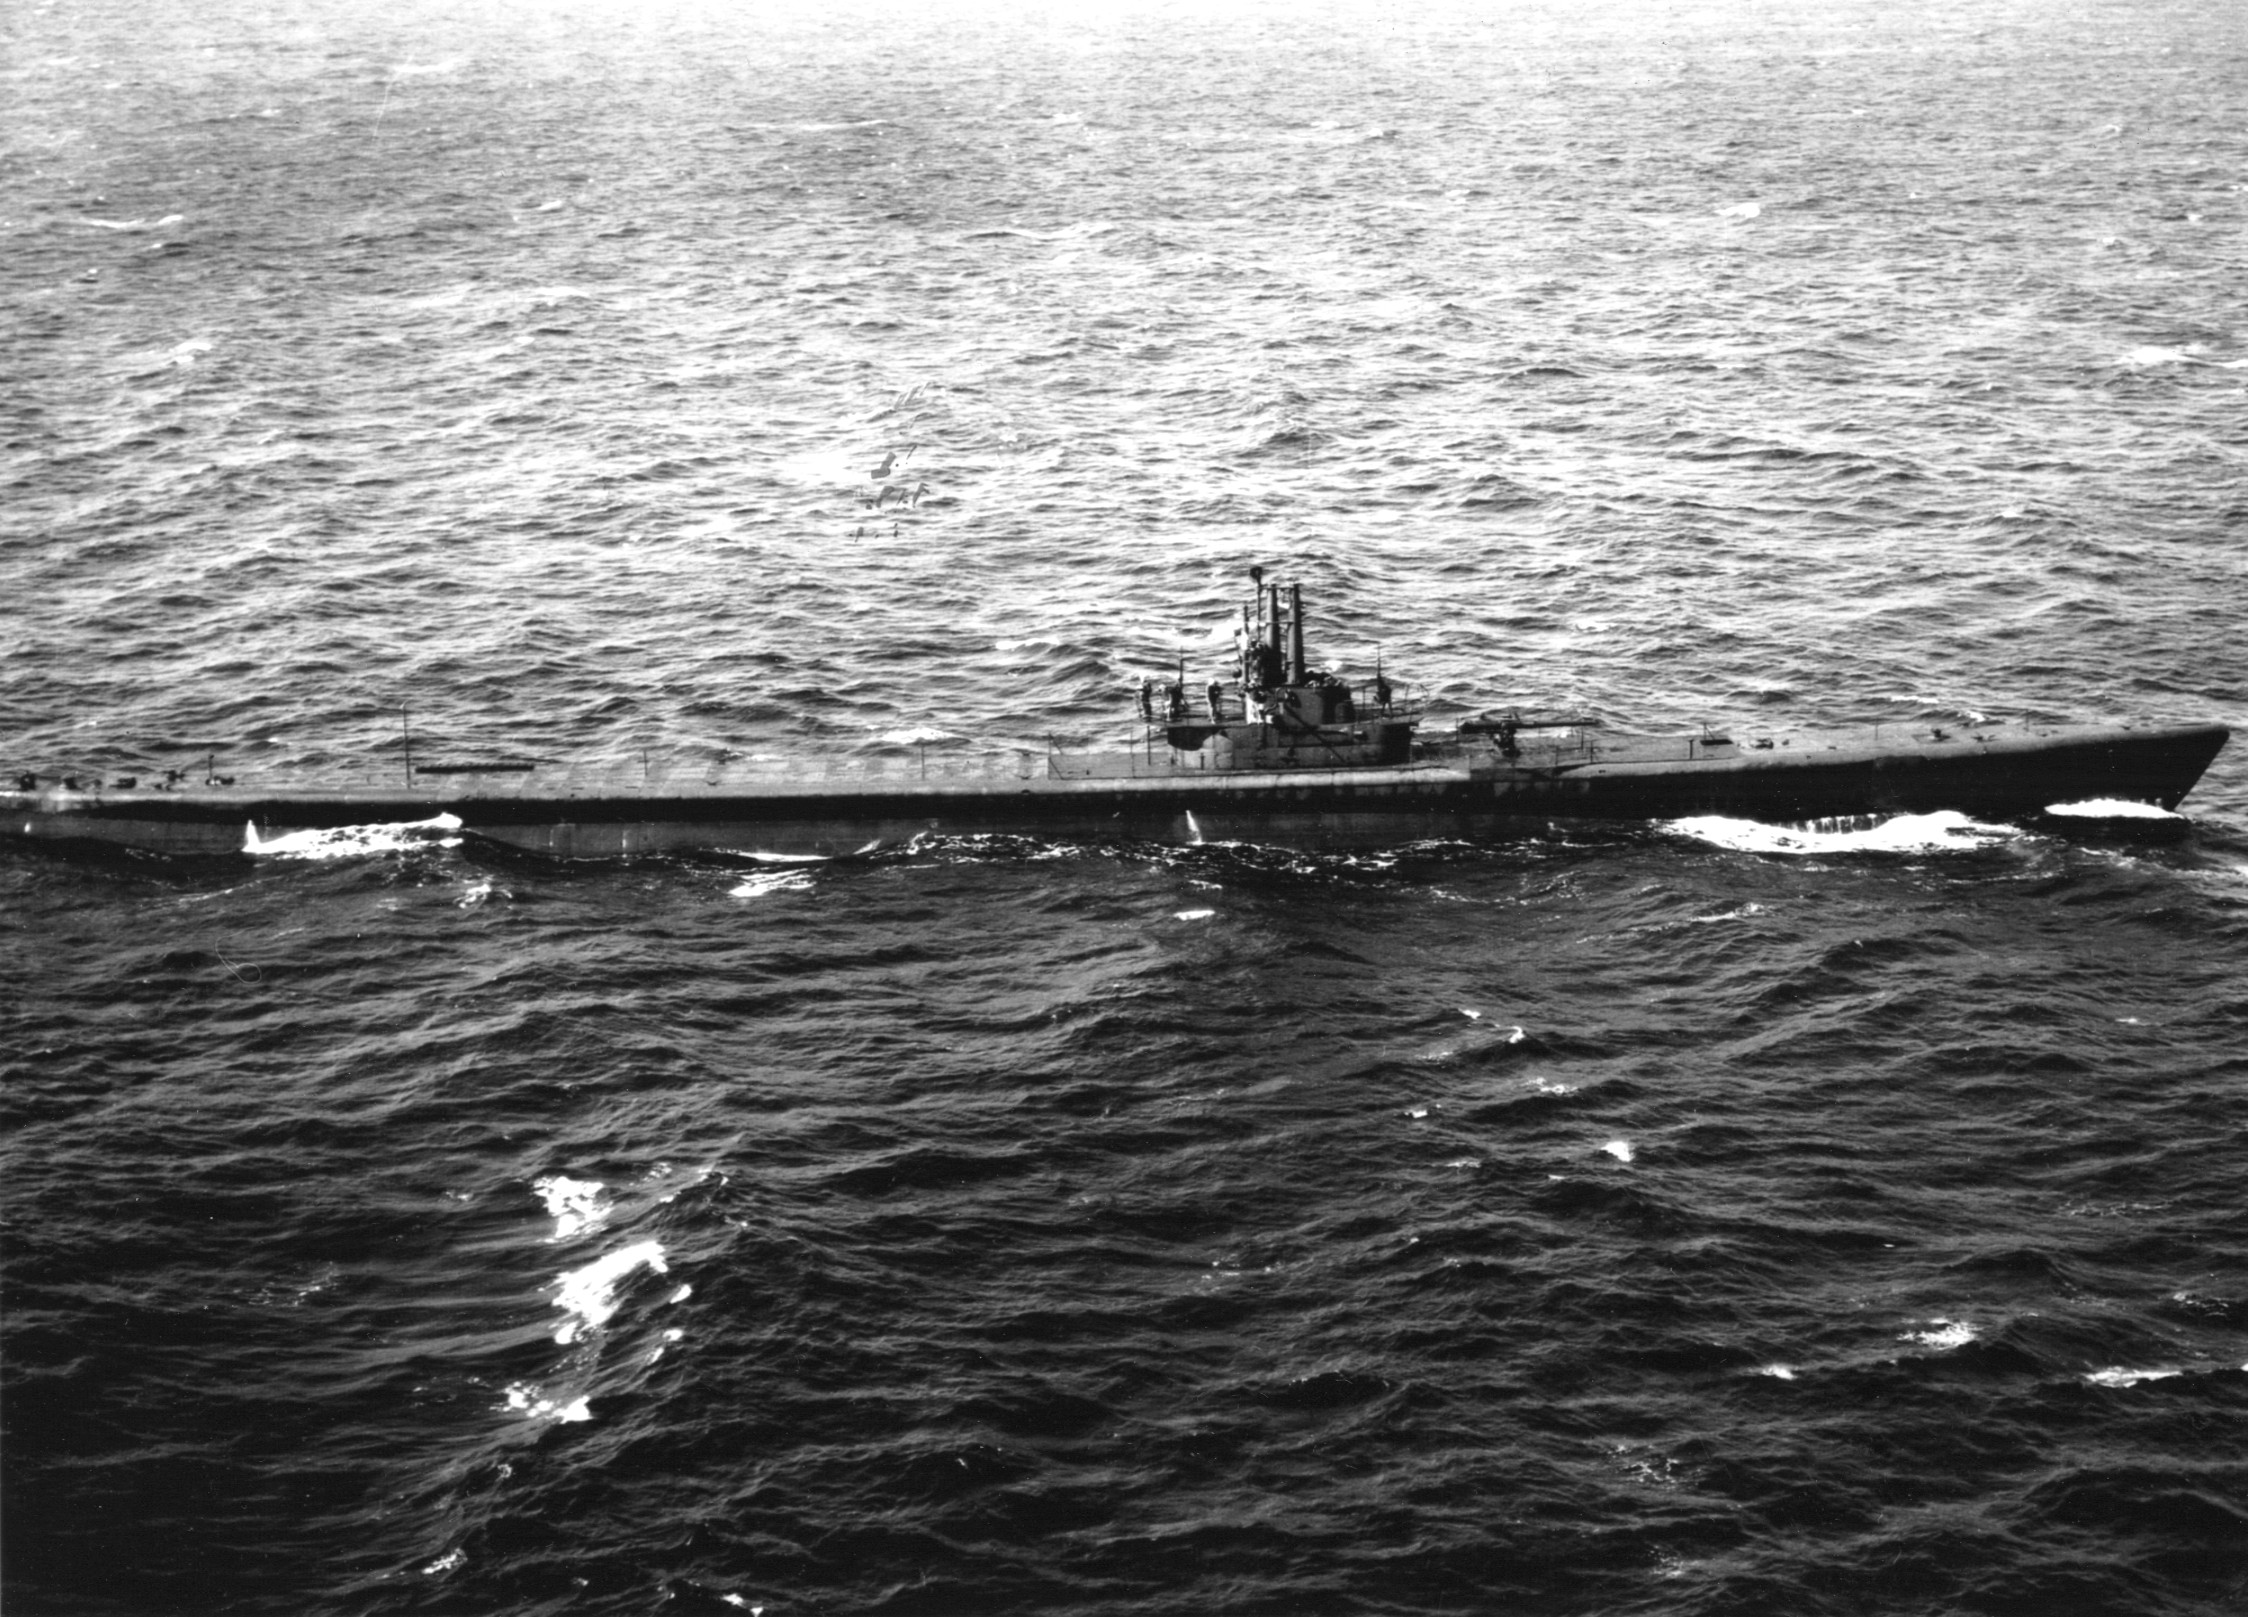 On patrol in the open sea, the submarine USS Batfish is photographed from the air on September 20, 1943.